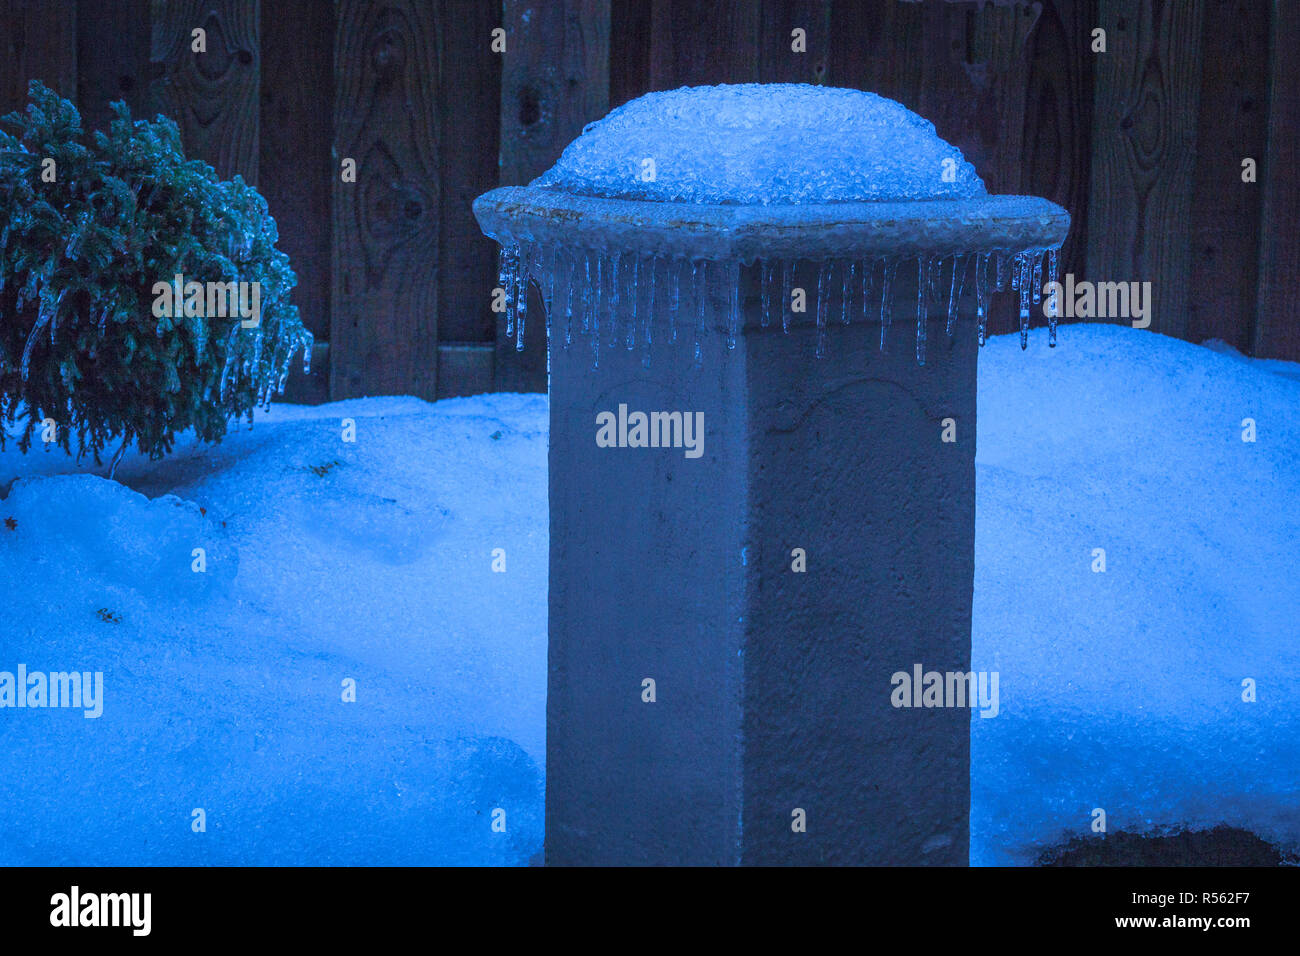 Row of icycles formed on the edge of a garden pedestal in winter. Ontario, Canada Stock Photo